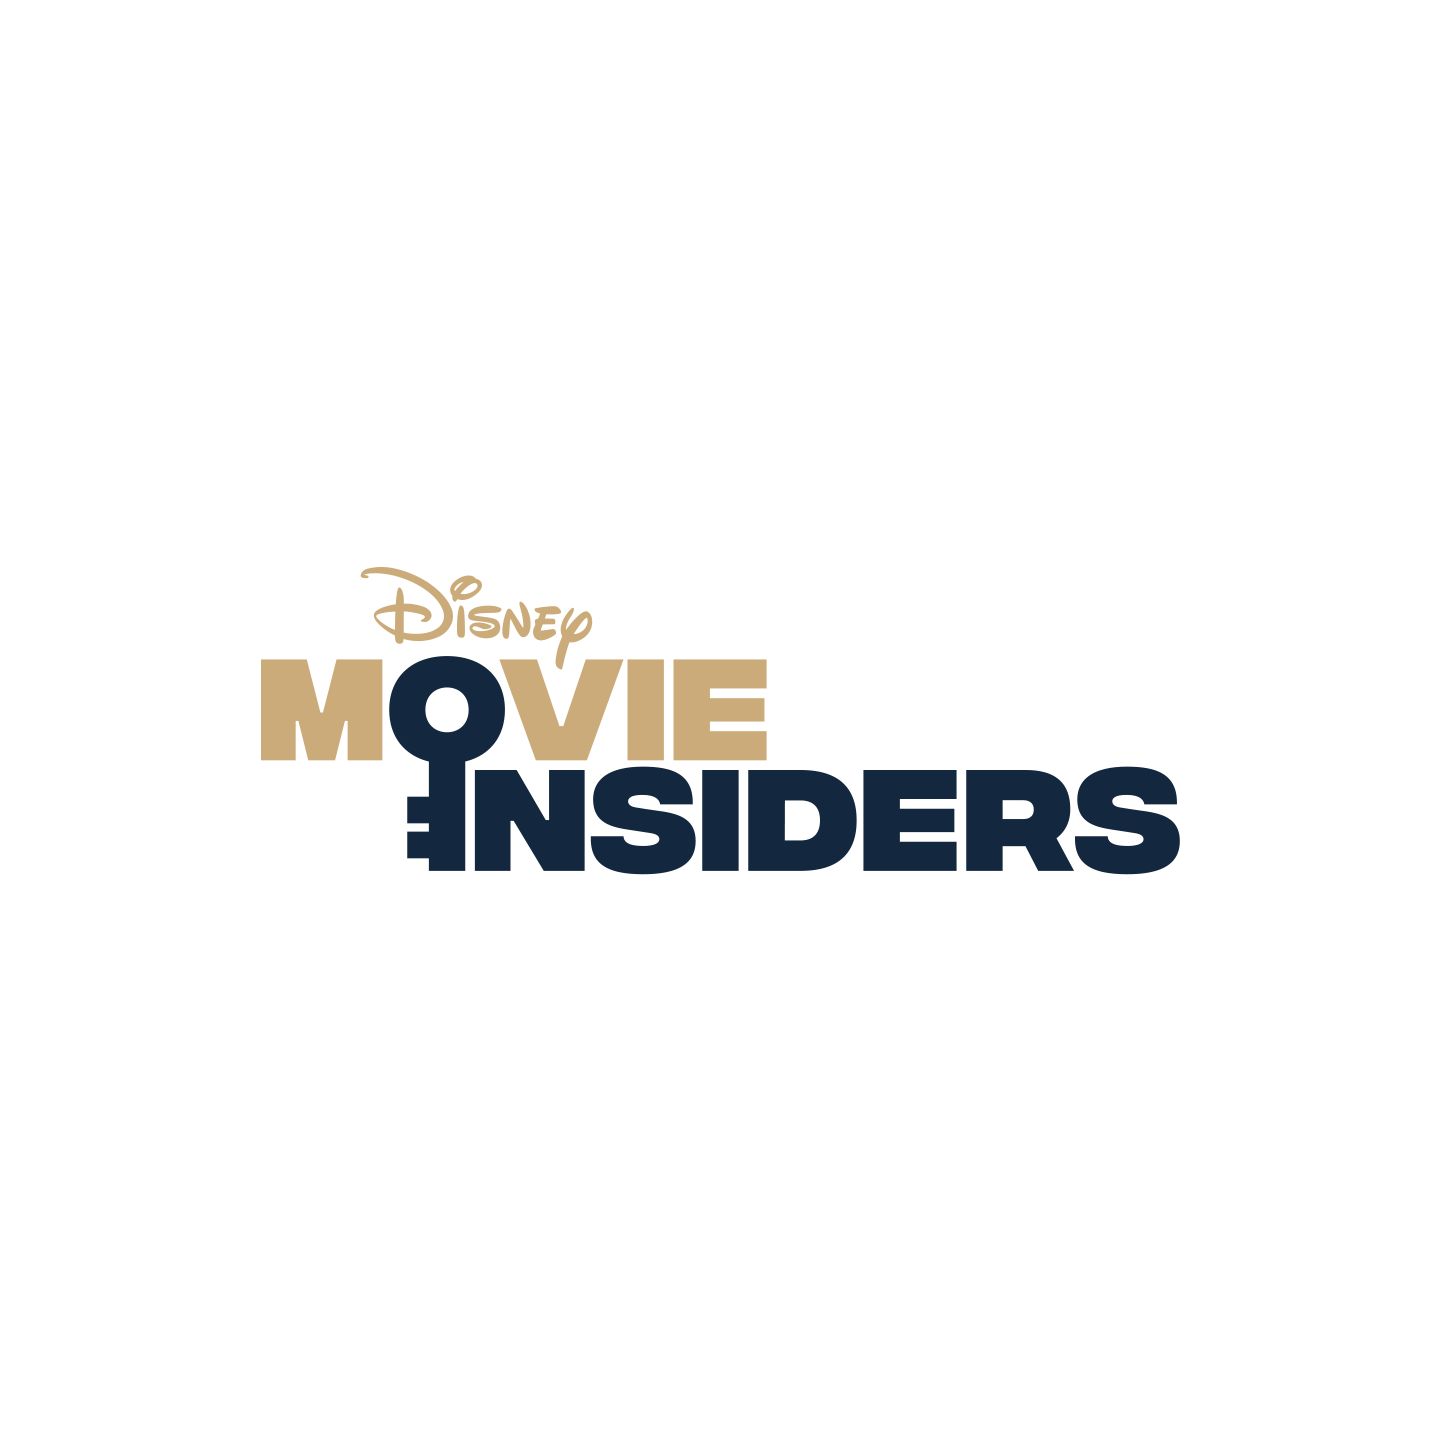 Disney Movie Insiders - UNLOCK THE FAN WITHIN - Celebrate your Disney movie fandom with original content, rewards and one-of-a-kind experiences made by Disney fans for Disney fans. LEARN MORE